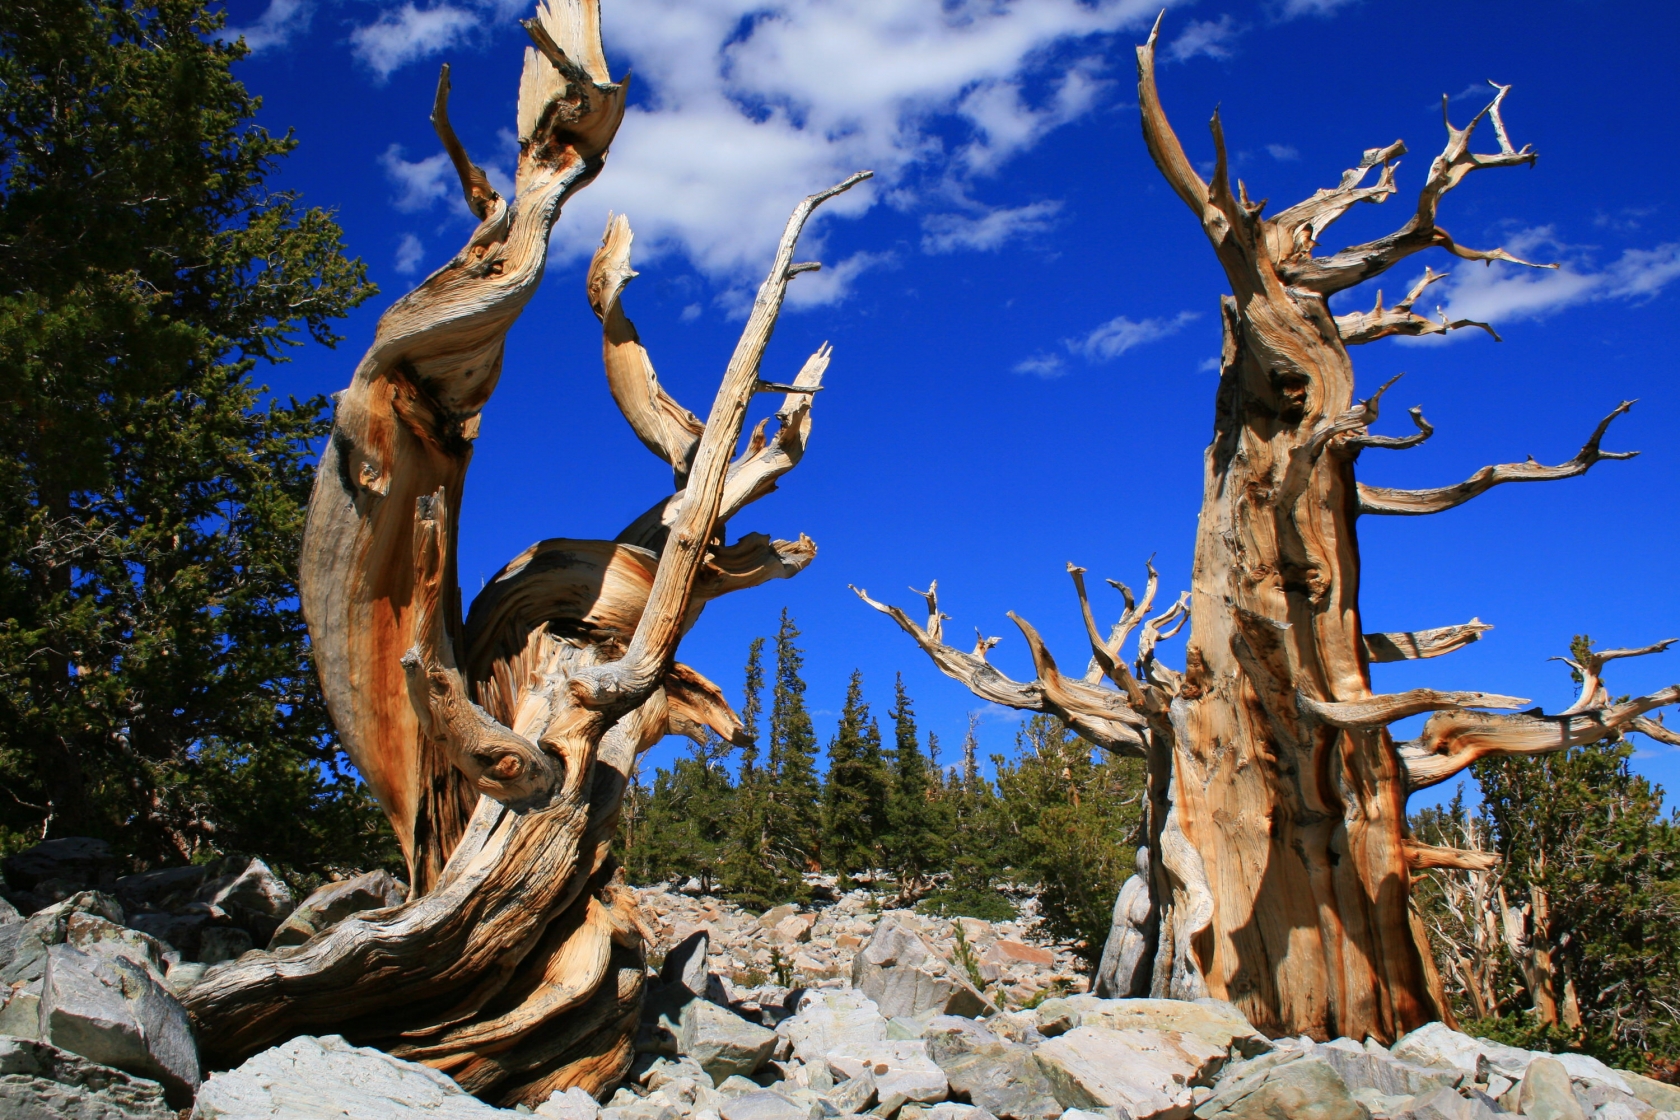 Ancient, weather worn, wiry branched Bristlecone pines stretch up to a deep blue sky in rocky, high-elevation area Great Basin National Park.